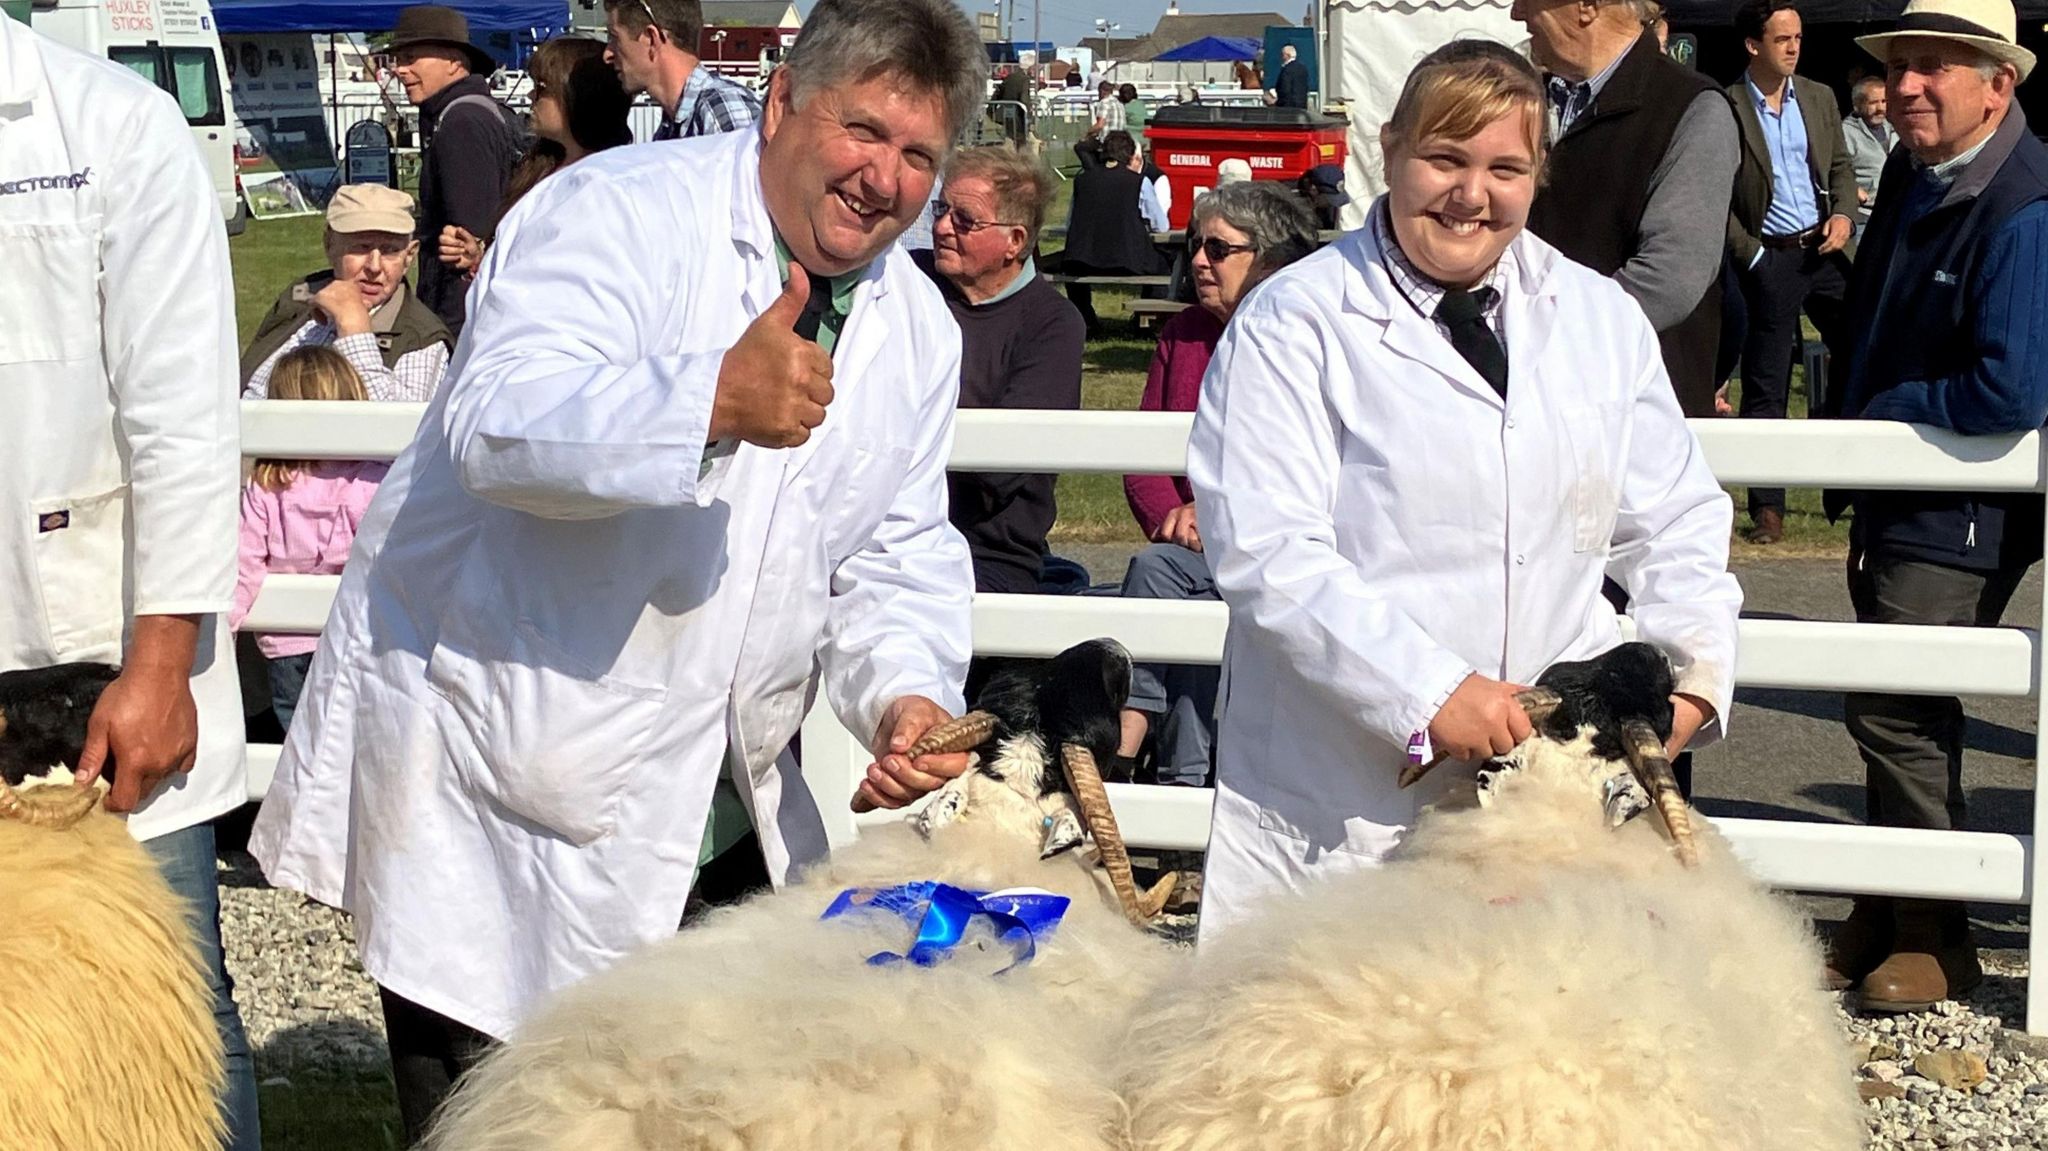 Father and daughter winning sheep show